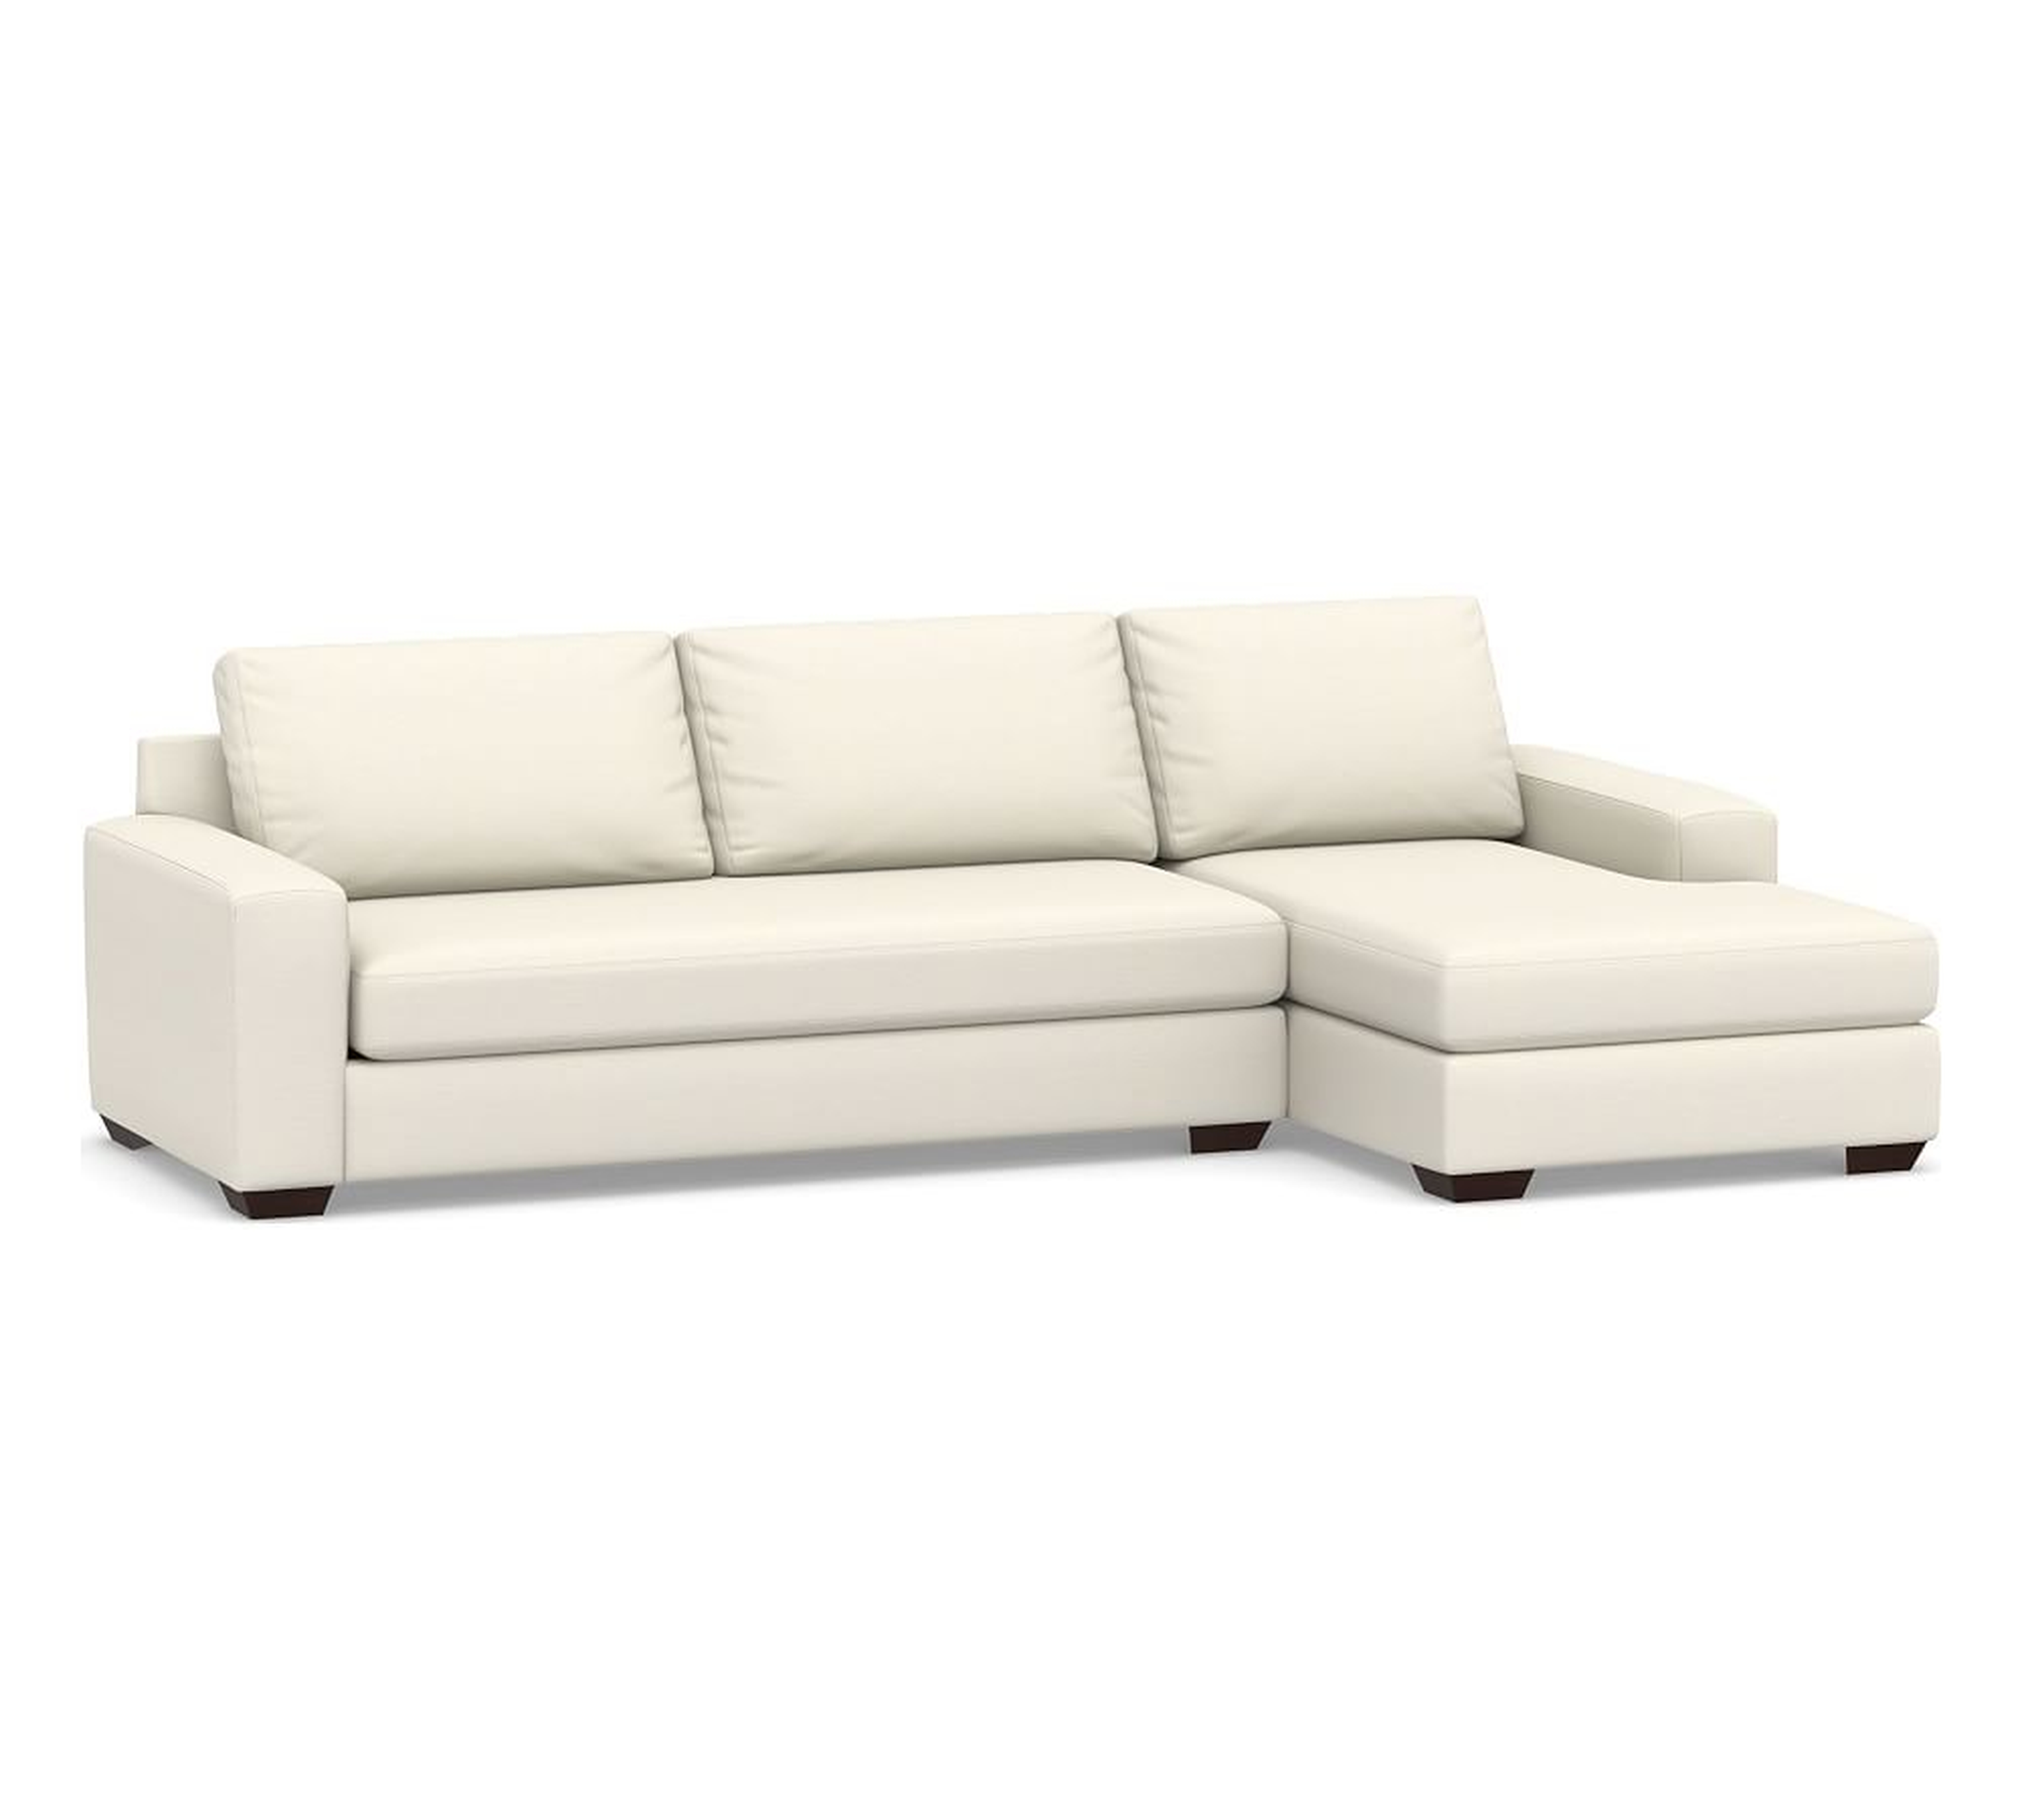 Big Sur Square Arm Upholstered Left Arm Sofa with Chaise Sectional and Bench Cushion, Down Blend Wrapped Cushions, Textured Twill Ivory - Pottery Barn